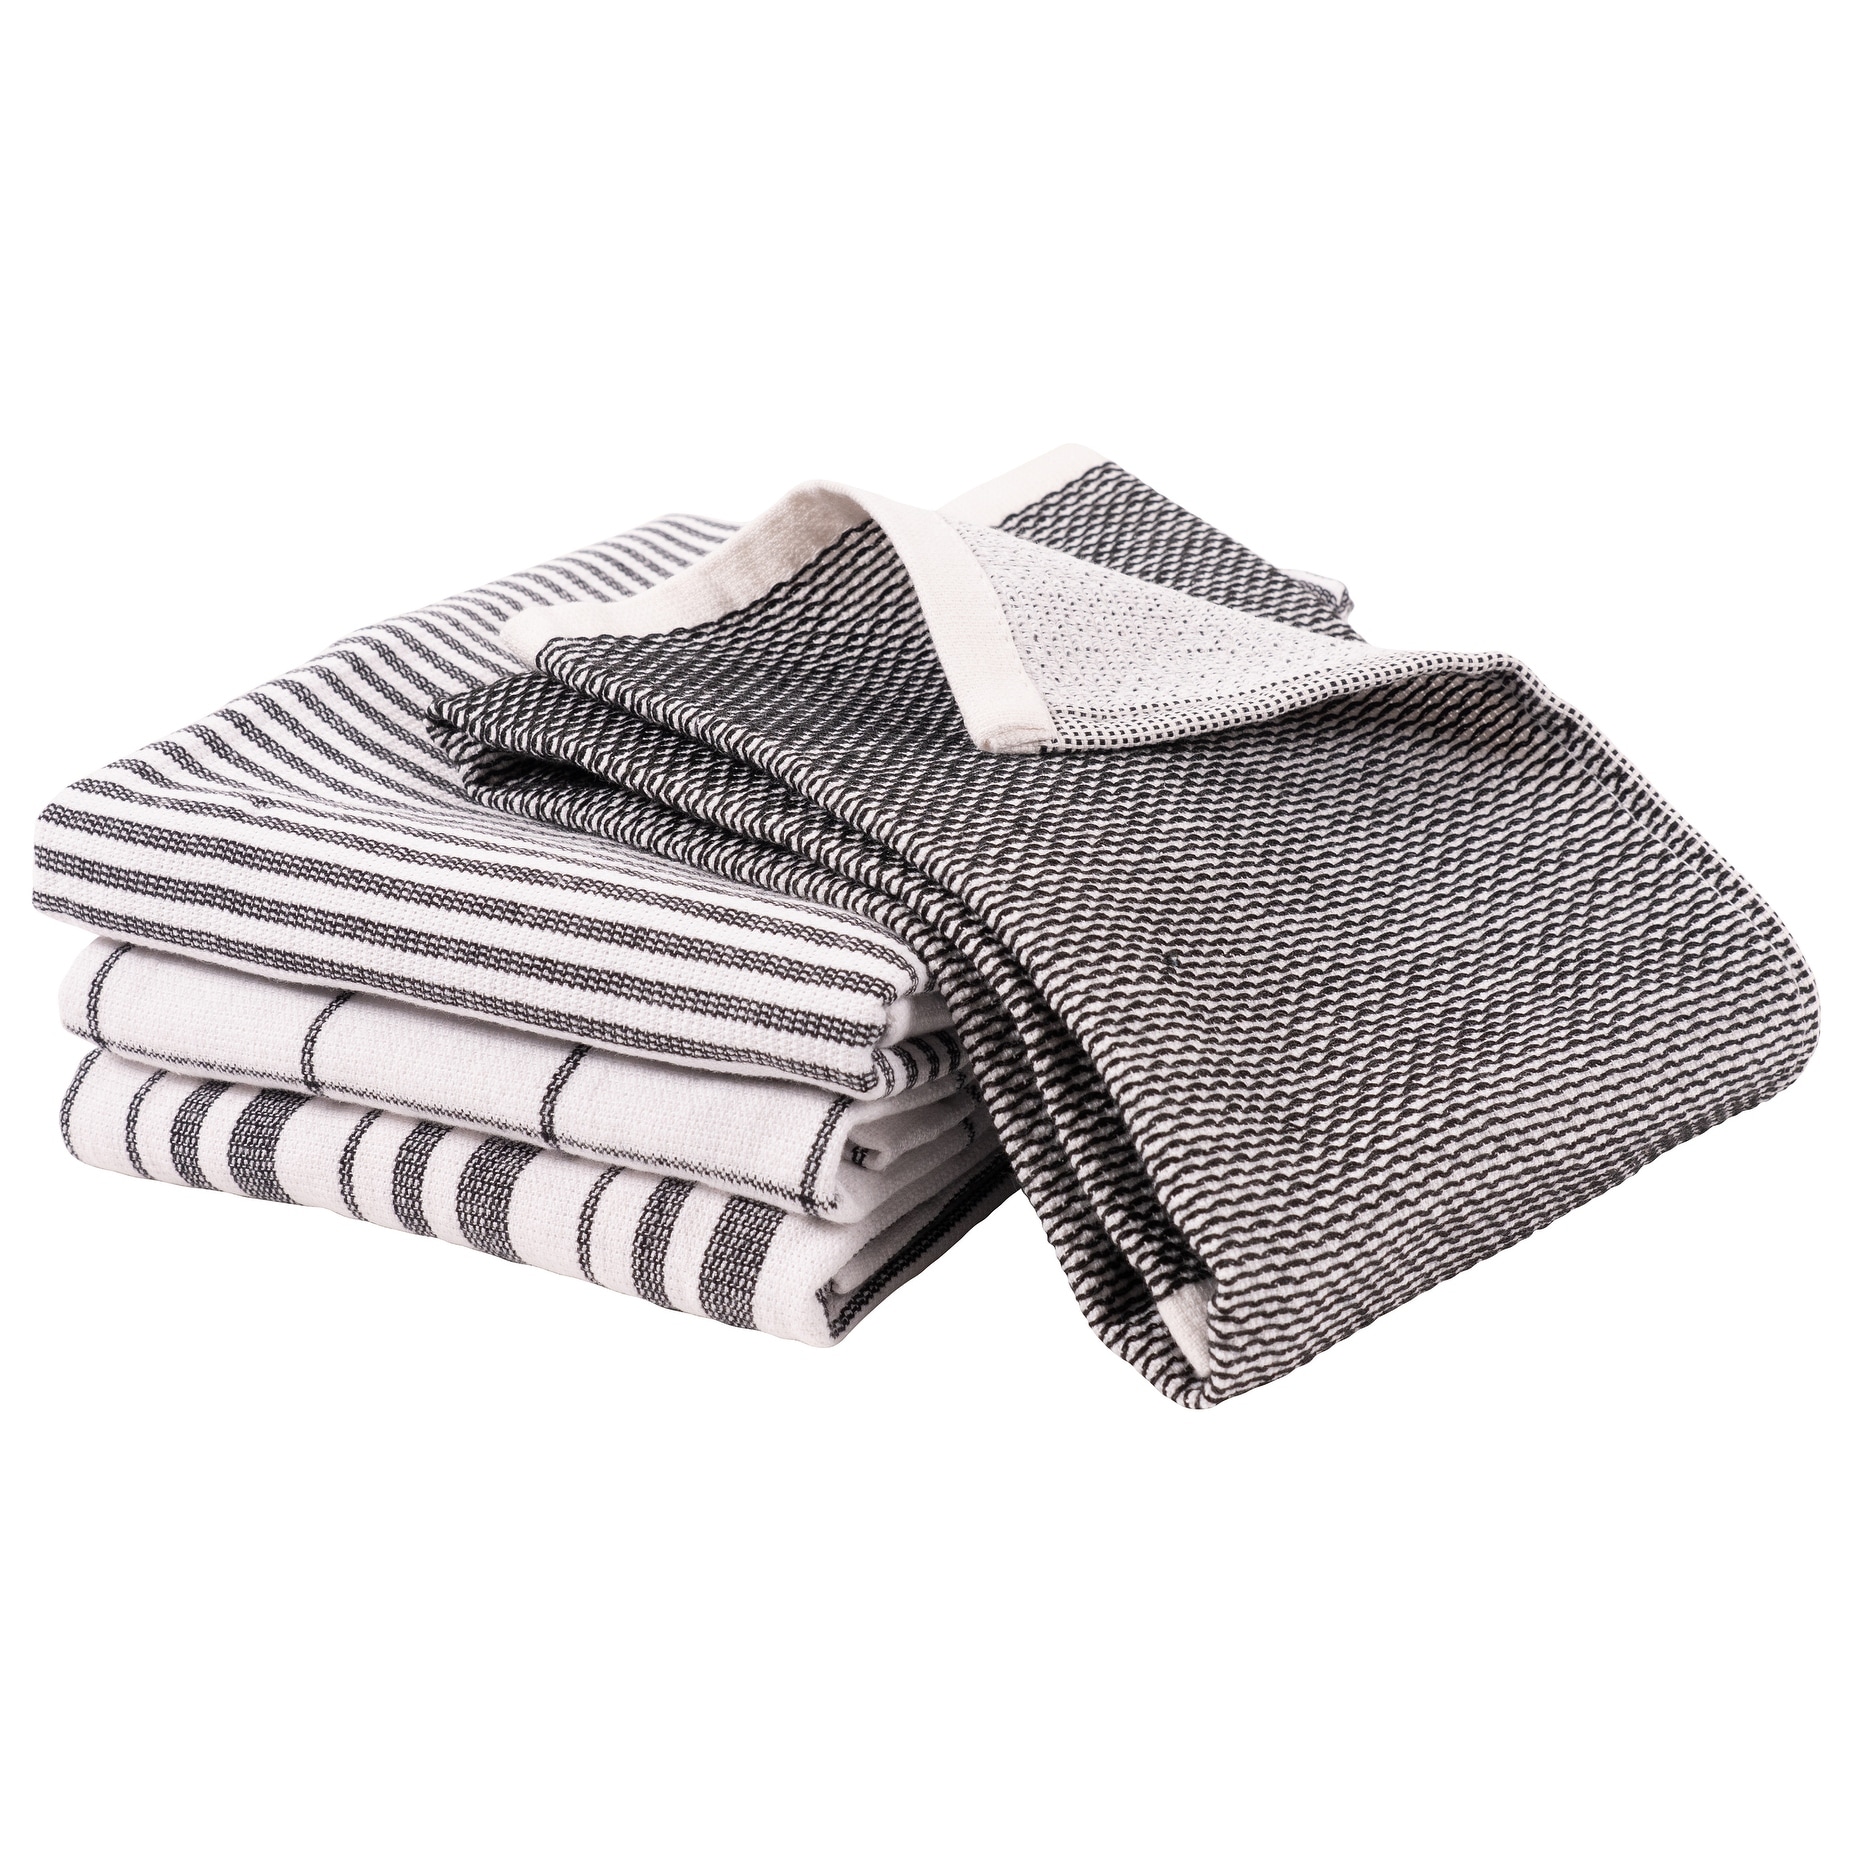 https://ak1.ostkcdn.com/images/products/is/images/direct/b86c14bd1fa357fda1be34315610a0cff72ad014/Bed-Bath-and-Beyond-Our-Table-Dual-Purpose-Kitchen-Towels---Set-of-4.jpg